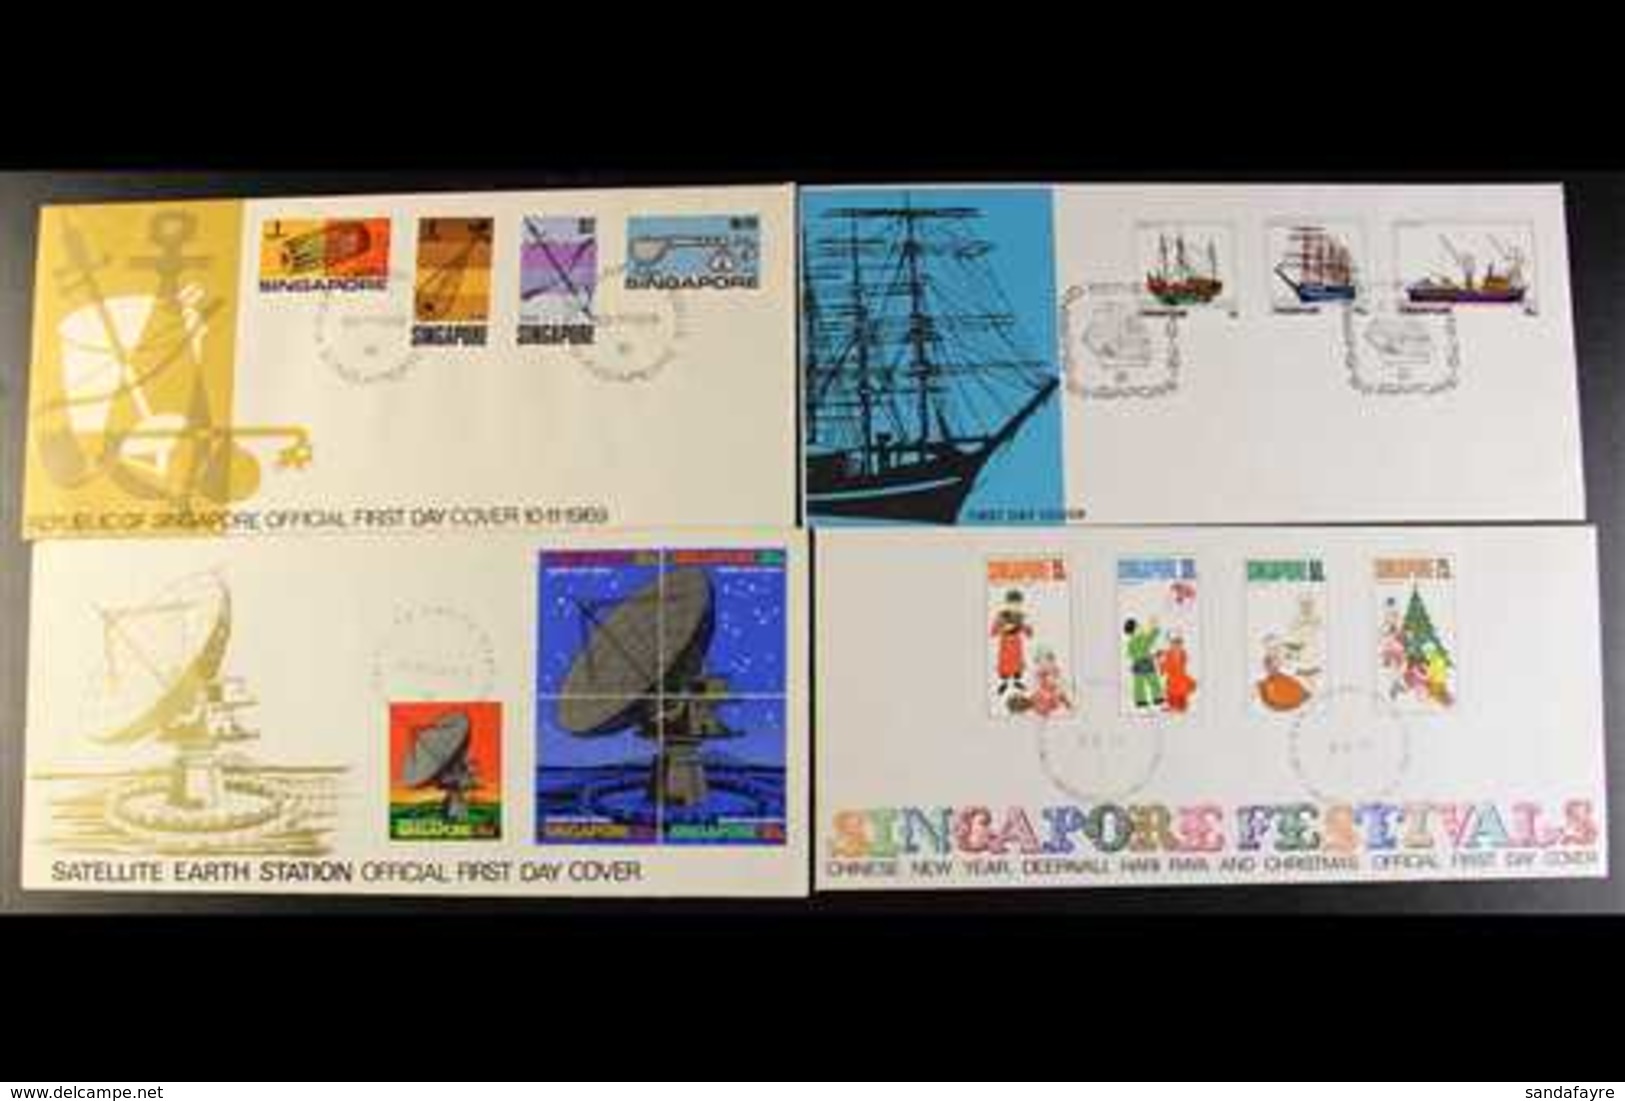 1969-1973  All Different Illustrated Unaddressed First Day Covers, Inc 1969 1c, 4c, $2 & $5 Defins, 1971 Art, Festivals  - Singapore (...-1959)